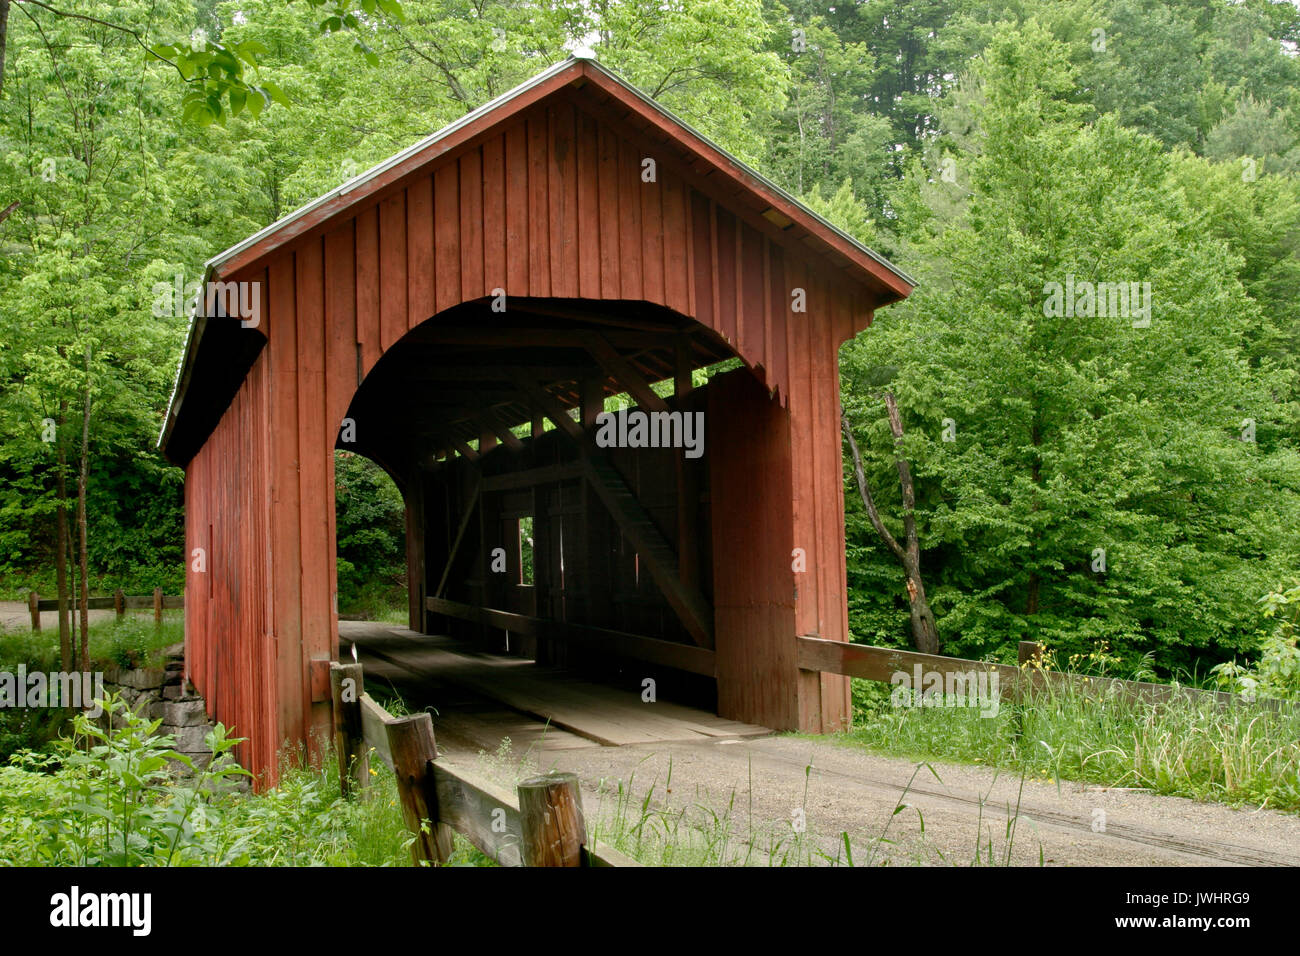 Slaughter House covered bridge in Northfield, VT. in Washington county, Central Vermont. 55 foot Queenpost Truss bridge built in 1872, crosses the Dog Stock Photo